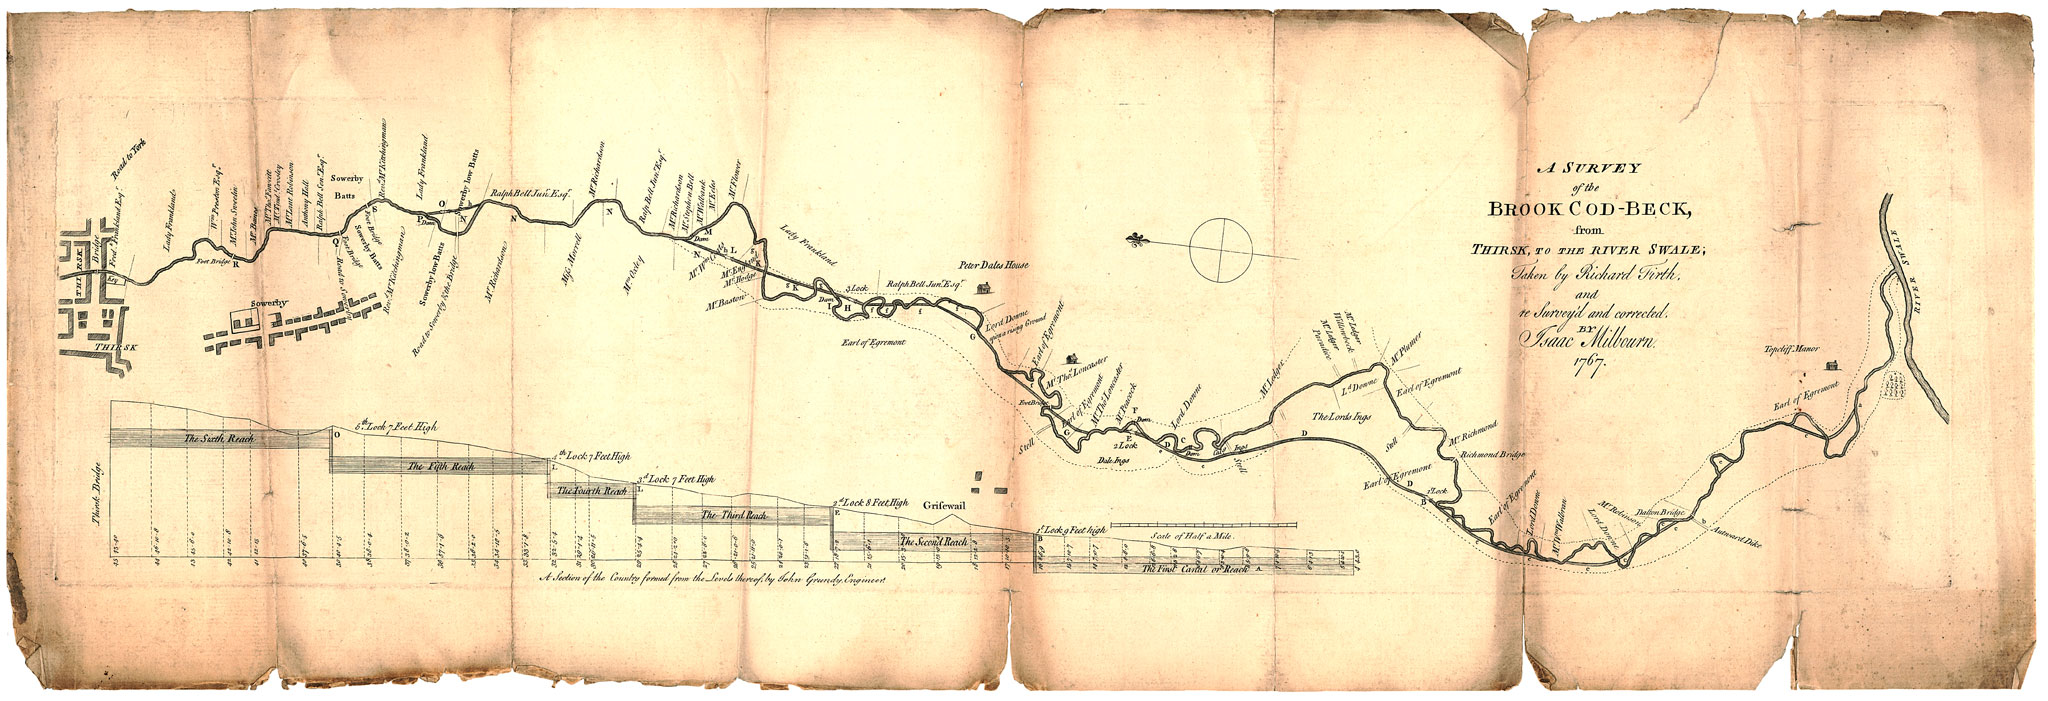 Old map showing Thirsk canal plans